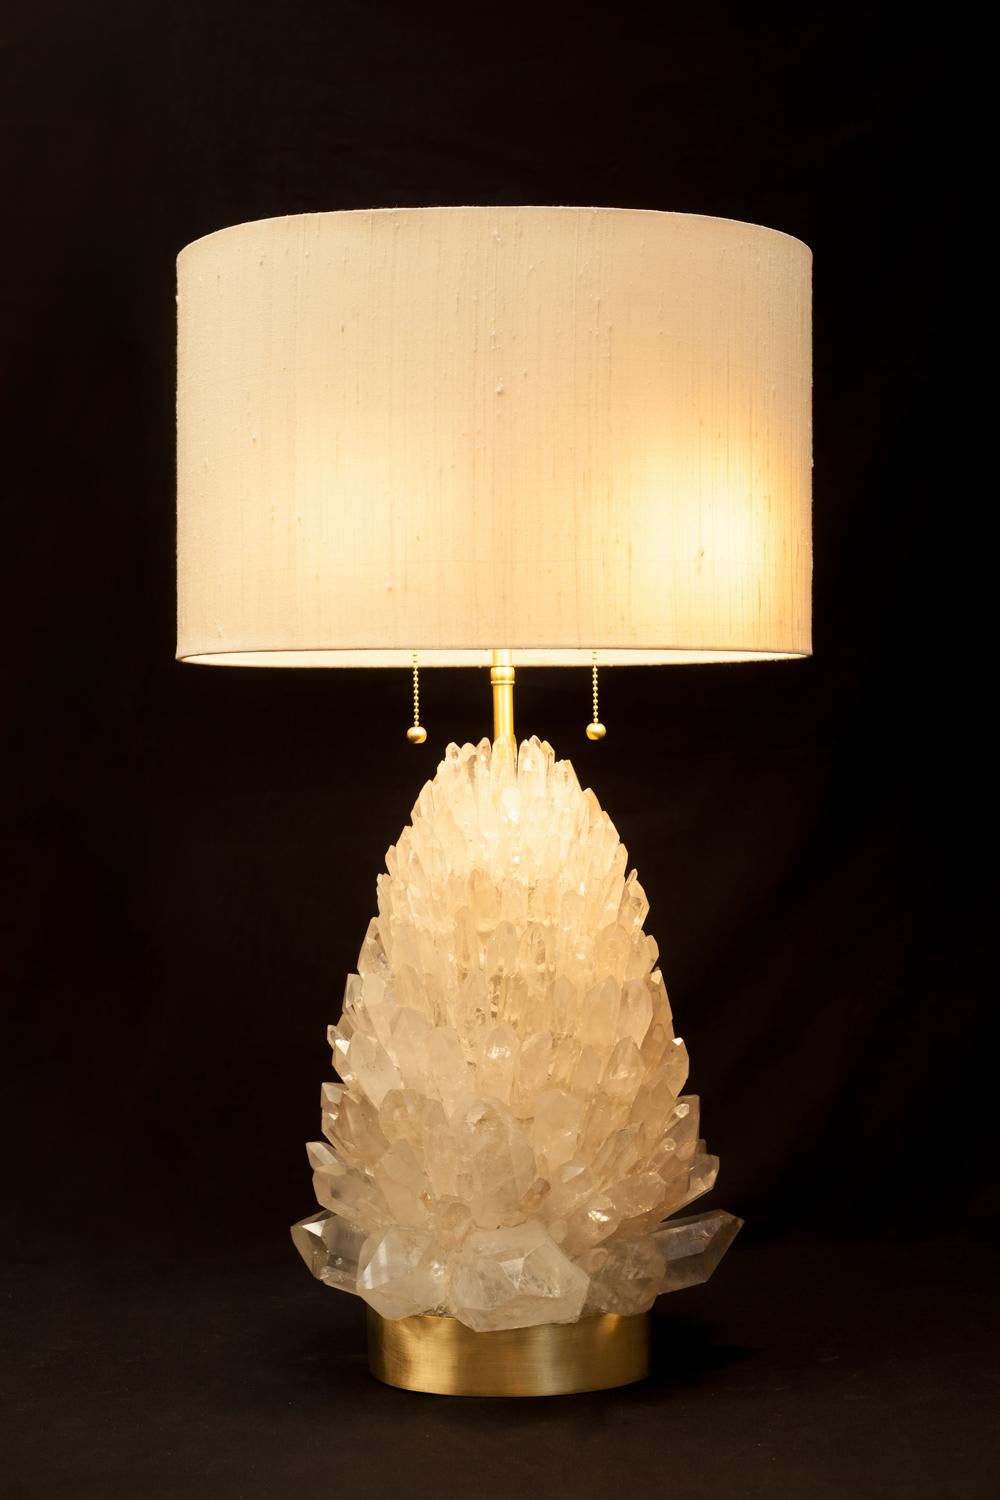 Natural rock crystal table lamp, signed by Demian Quincke.
Natural rock crystal assembled and sculpted on brass base.
Dimensions: 70 x 30 x 26 cm.

Brass 2lt.cluster with large body, includes pull chain sockets, swivels, body.
top adjustable